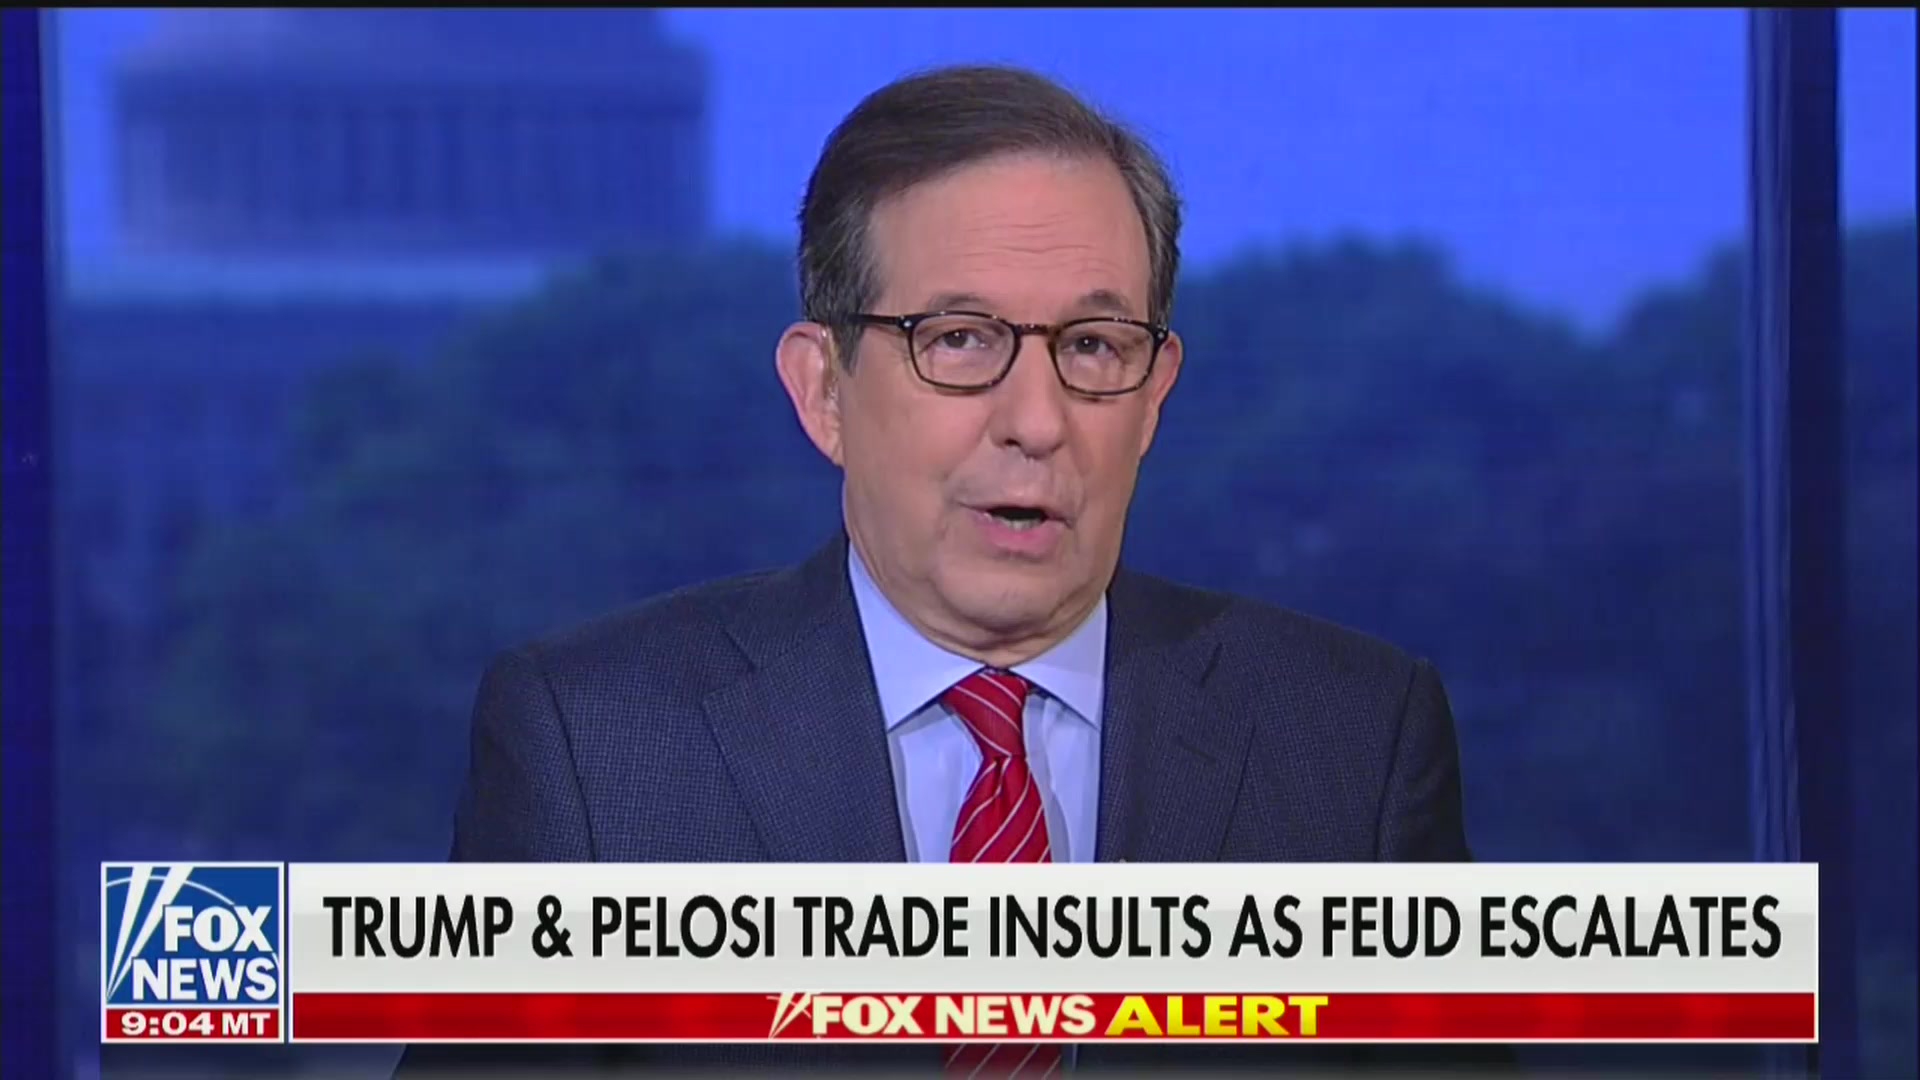 Fox News’ Chris Wallace: Nancy Pelosi Is ‘Clearly’ Getting Under Trump’s Skin